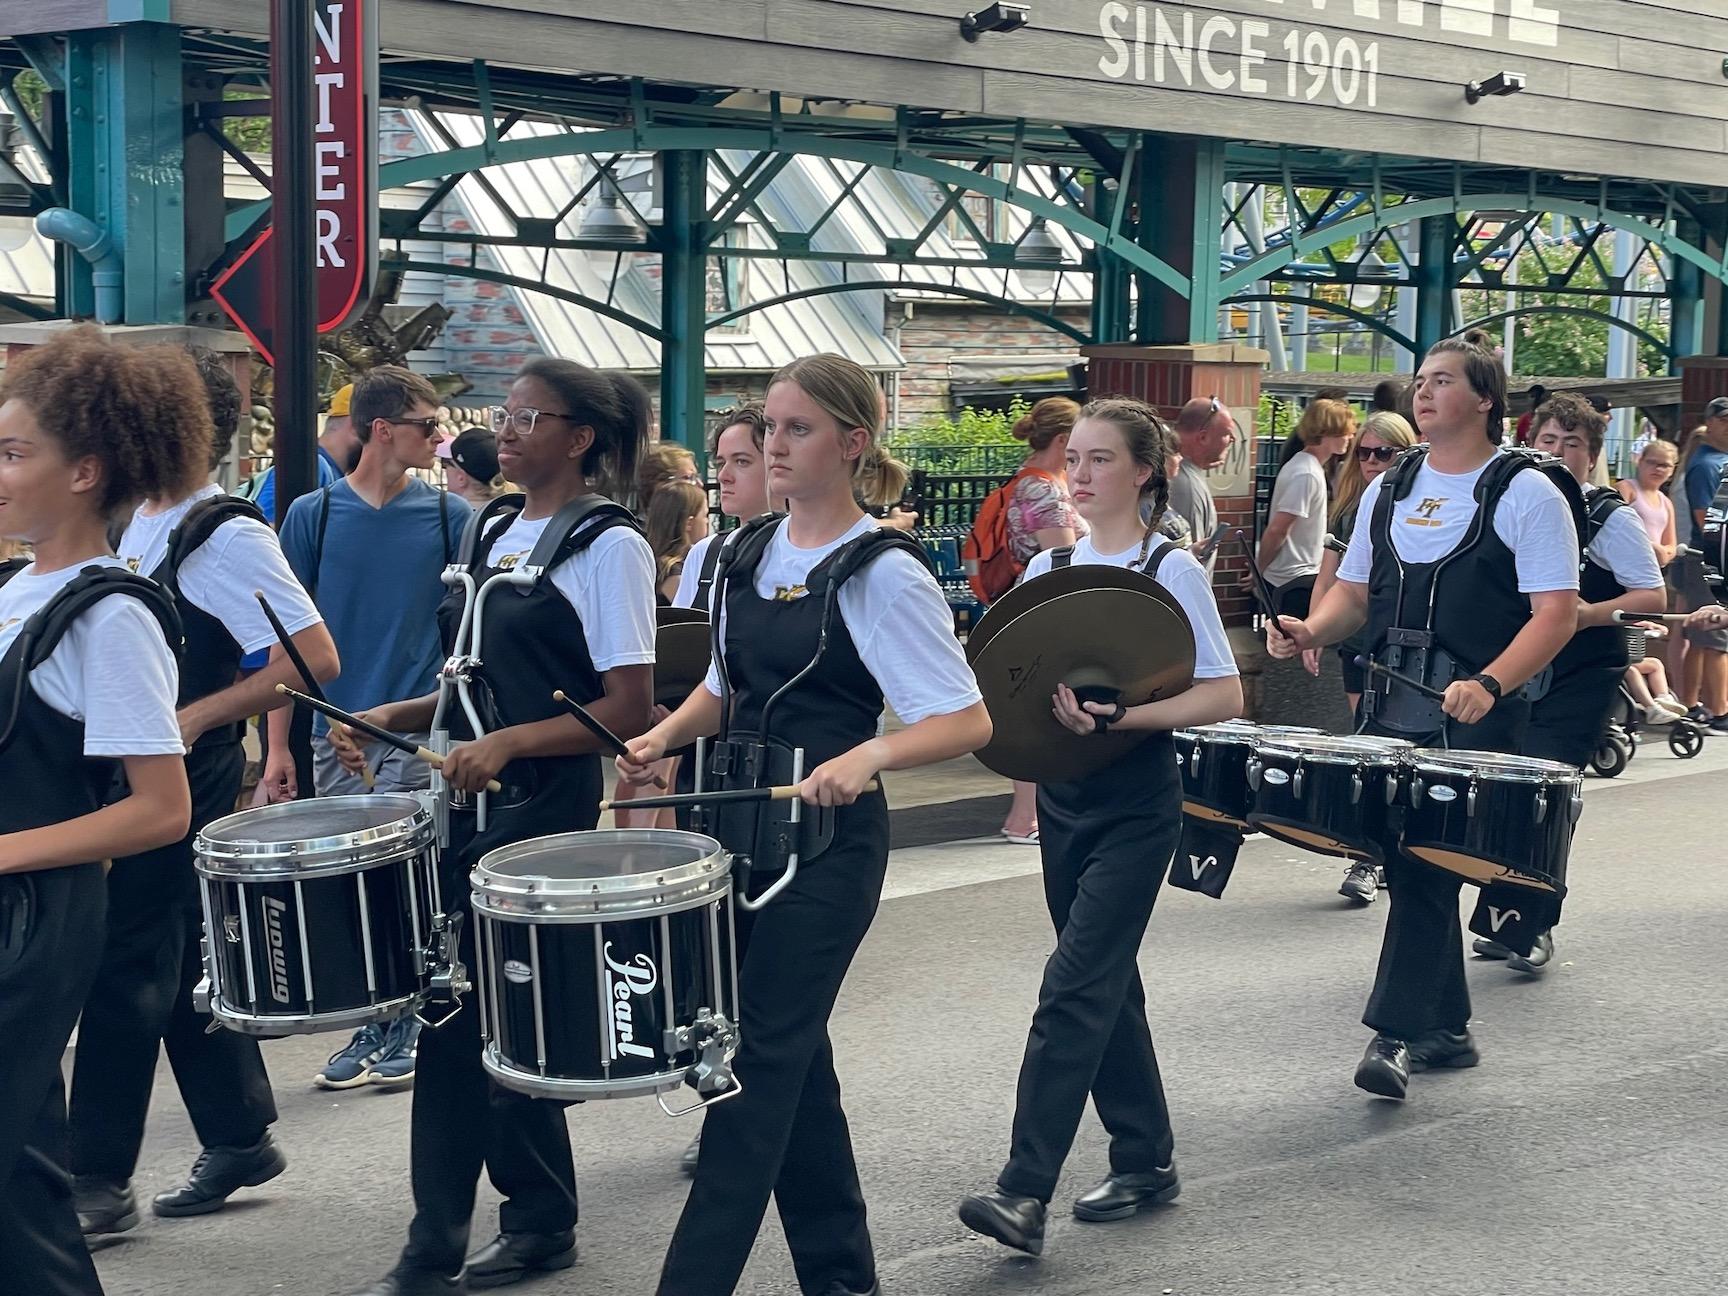 Marching band performs at Kennywood